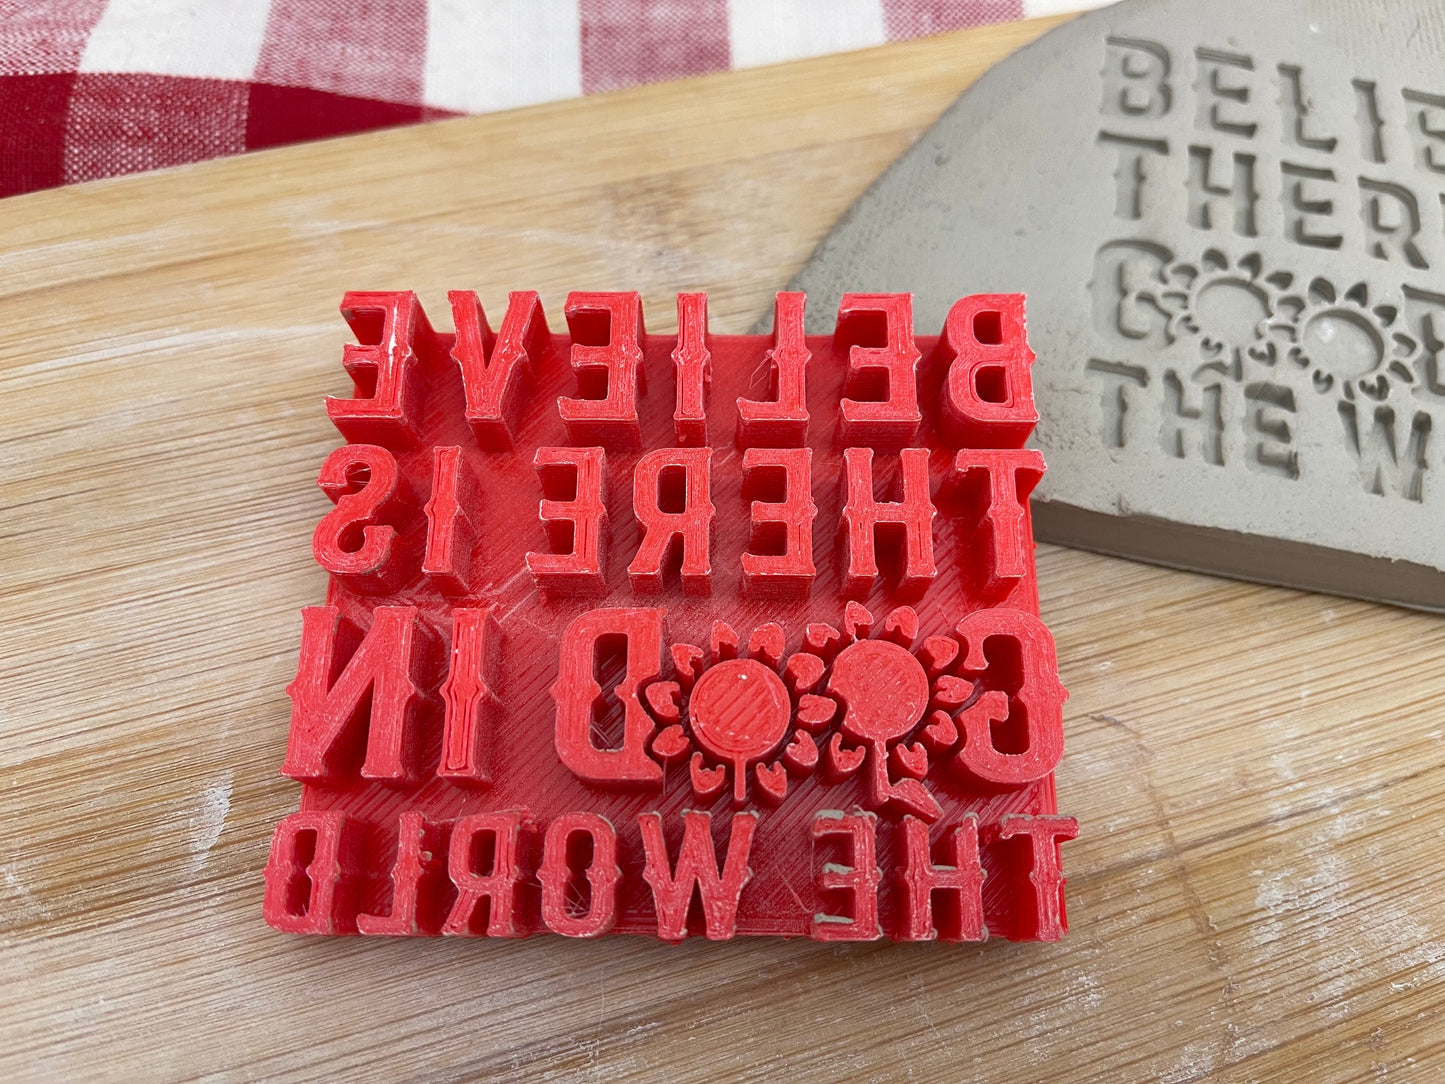 "Believe There is Good in the World" Word Stamp - plastic 3D printed, multiple sizes